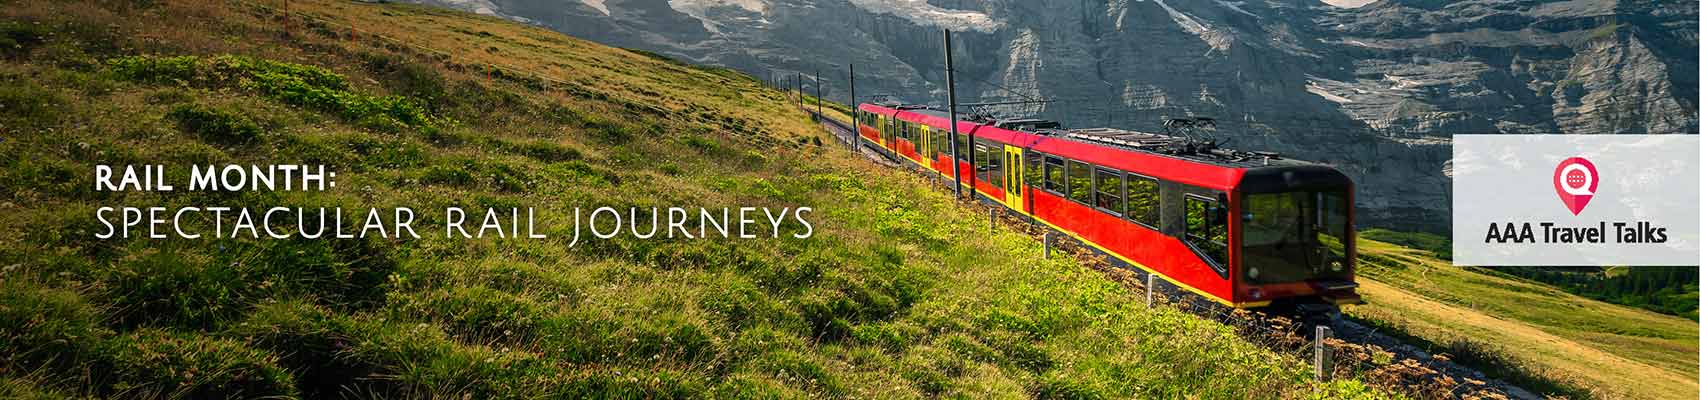 All aboard for AAA Rail Month: Spectacular Rail Journeys!